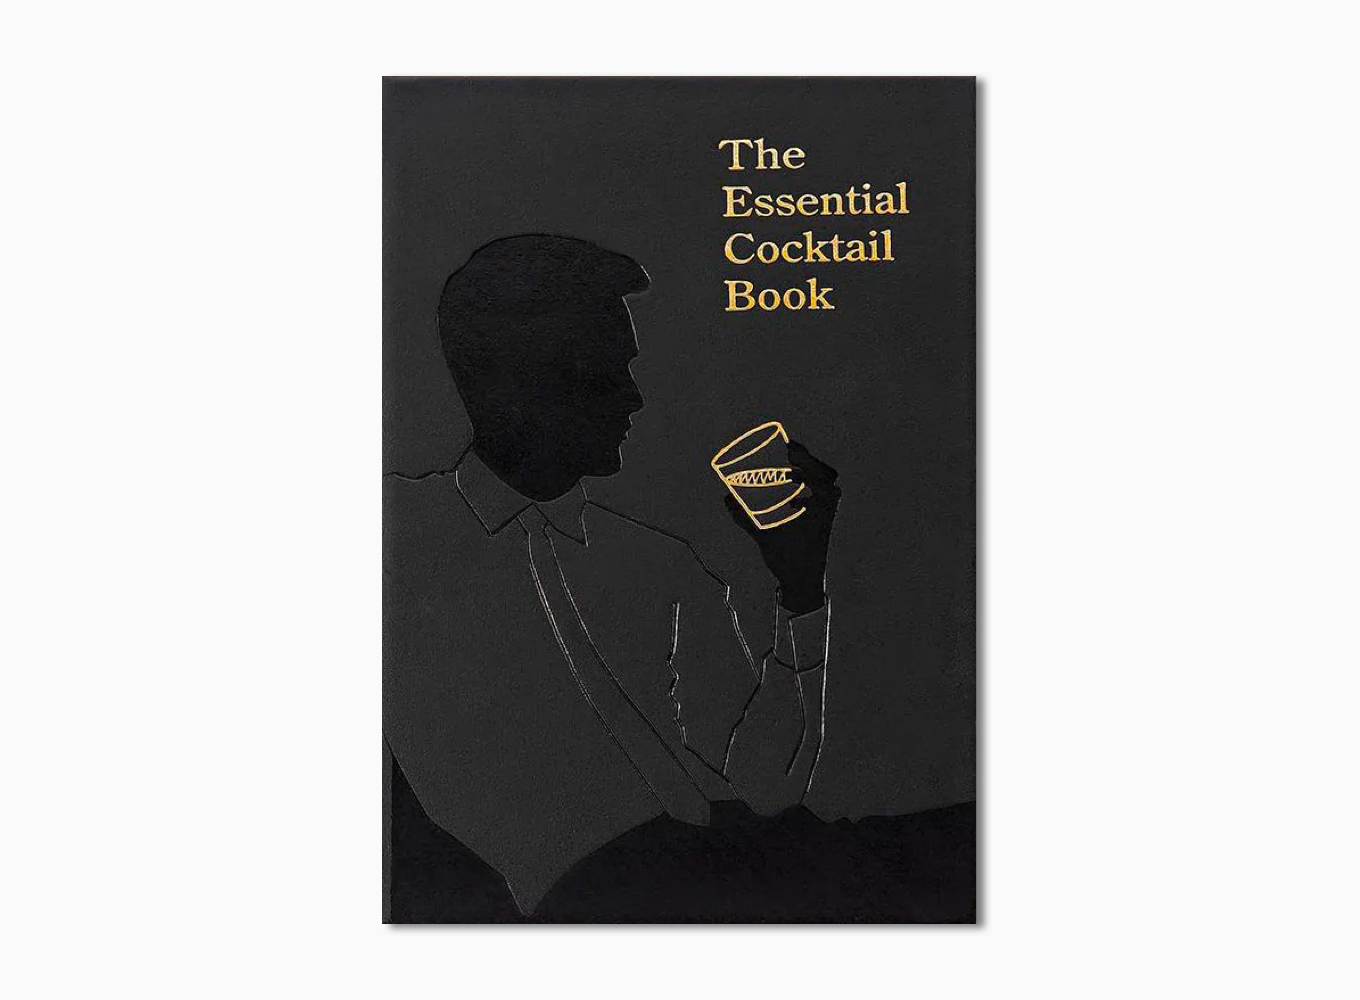 THE ESSENTIAL COCKTAIL BOOK